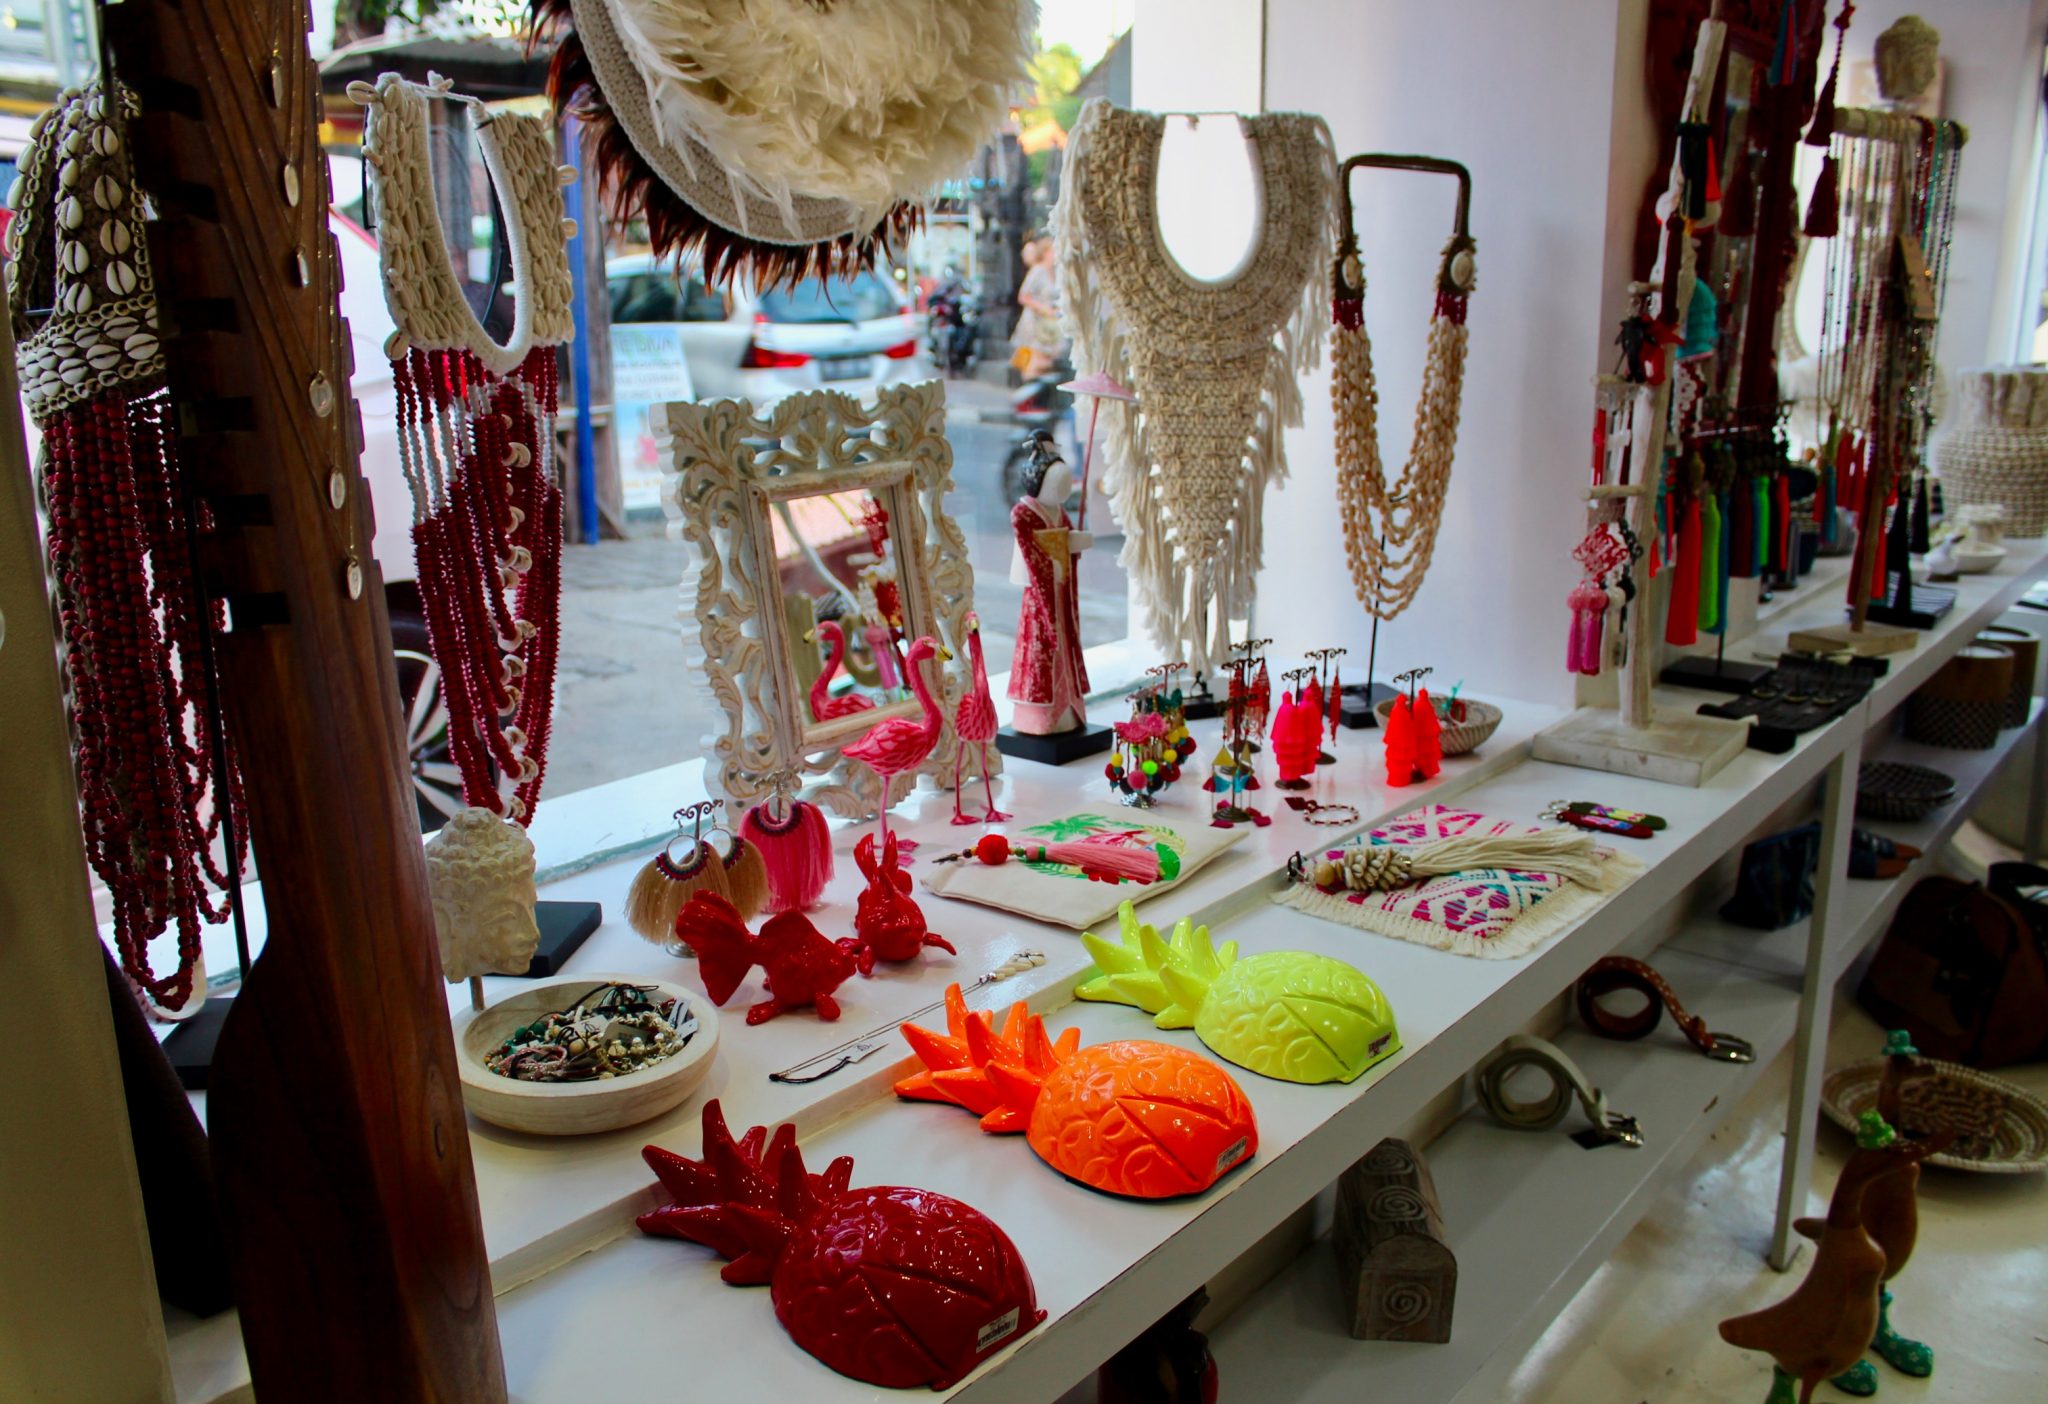 Complete Bali Shopping Guide